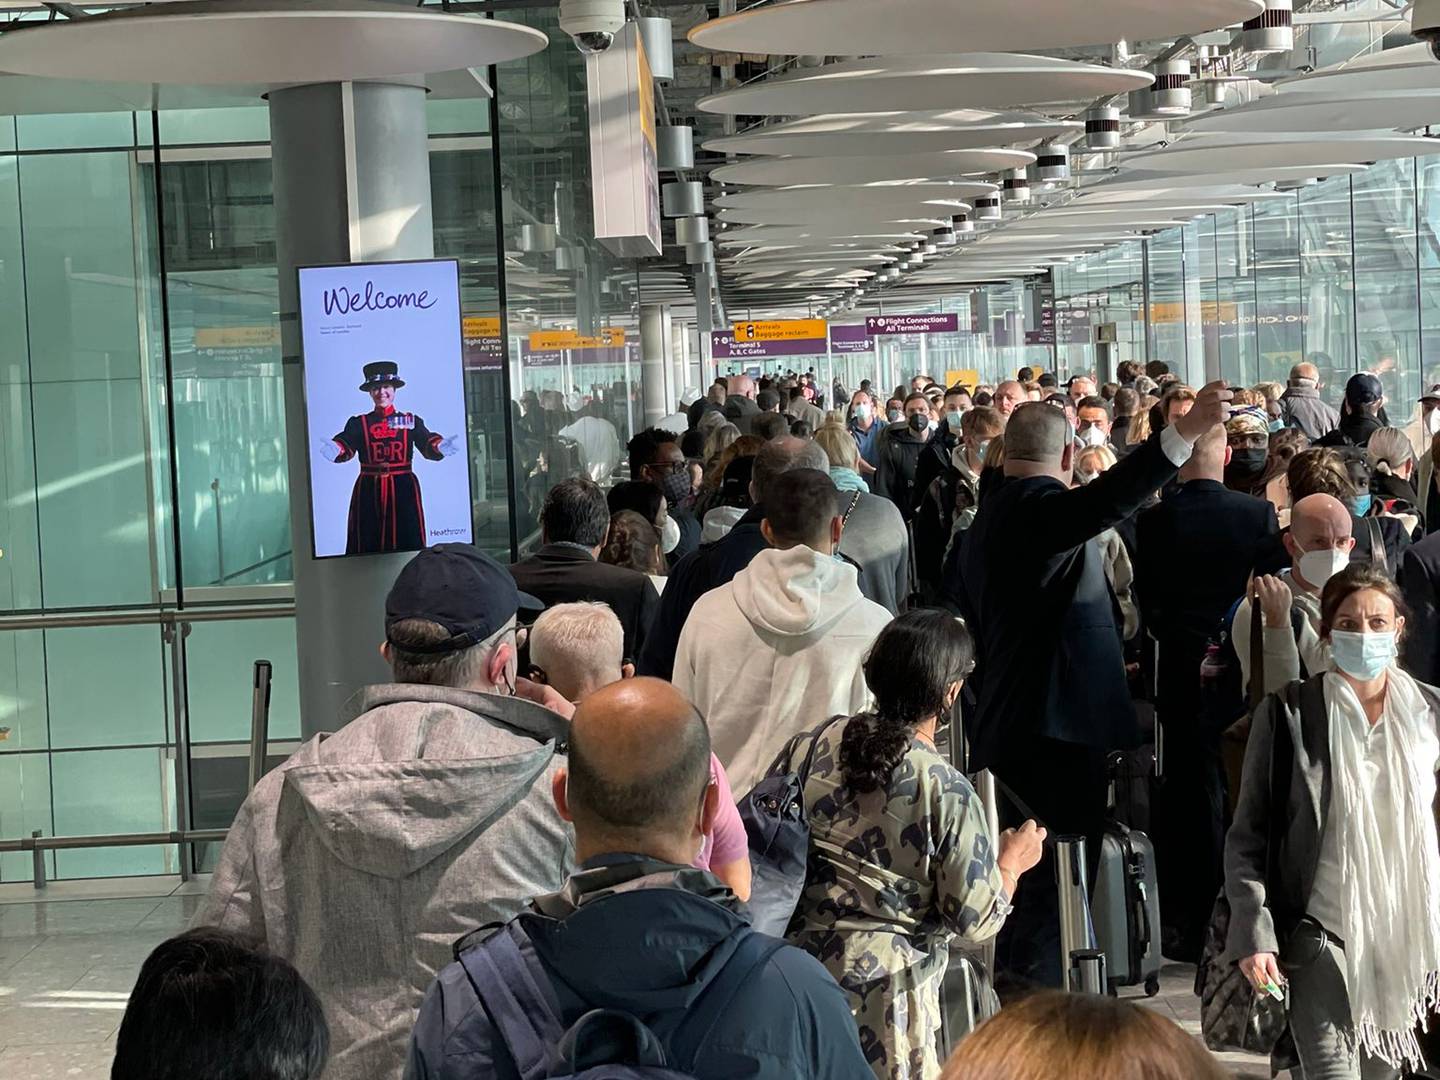 Queues at arrivals in Heathrow Airport on March 25 2022. Photo: Sven Kili / Twitter